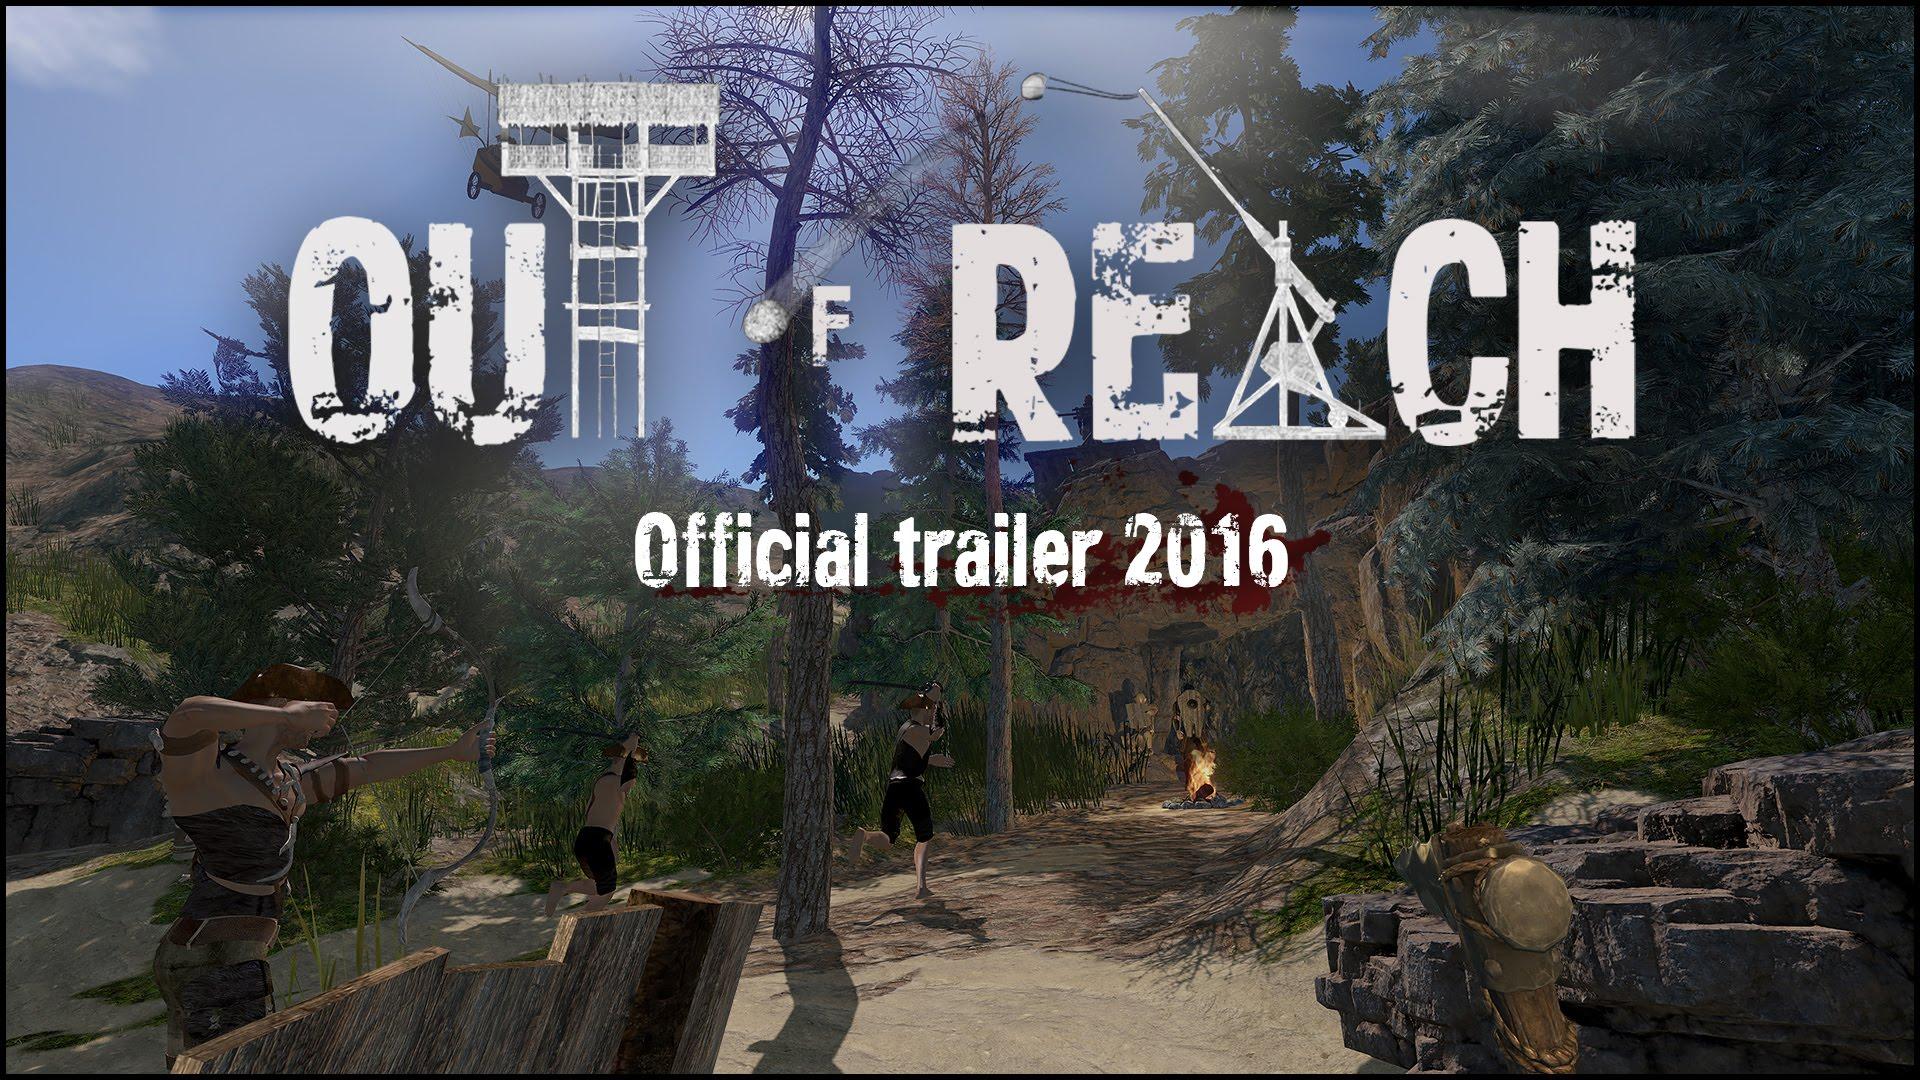 Out of access. Out of reach игра. Игры похожие на reach. World of reach. Игры похожие на out of Action.